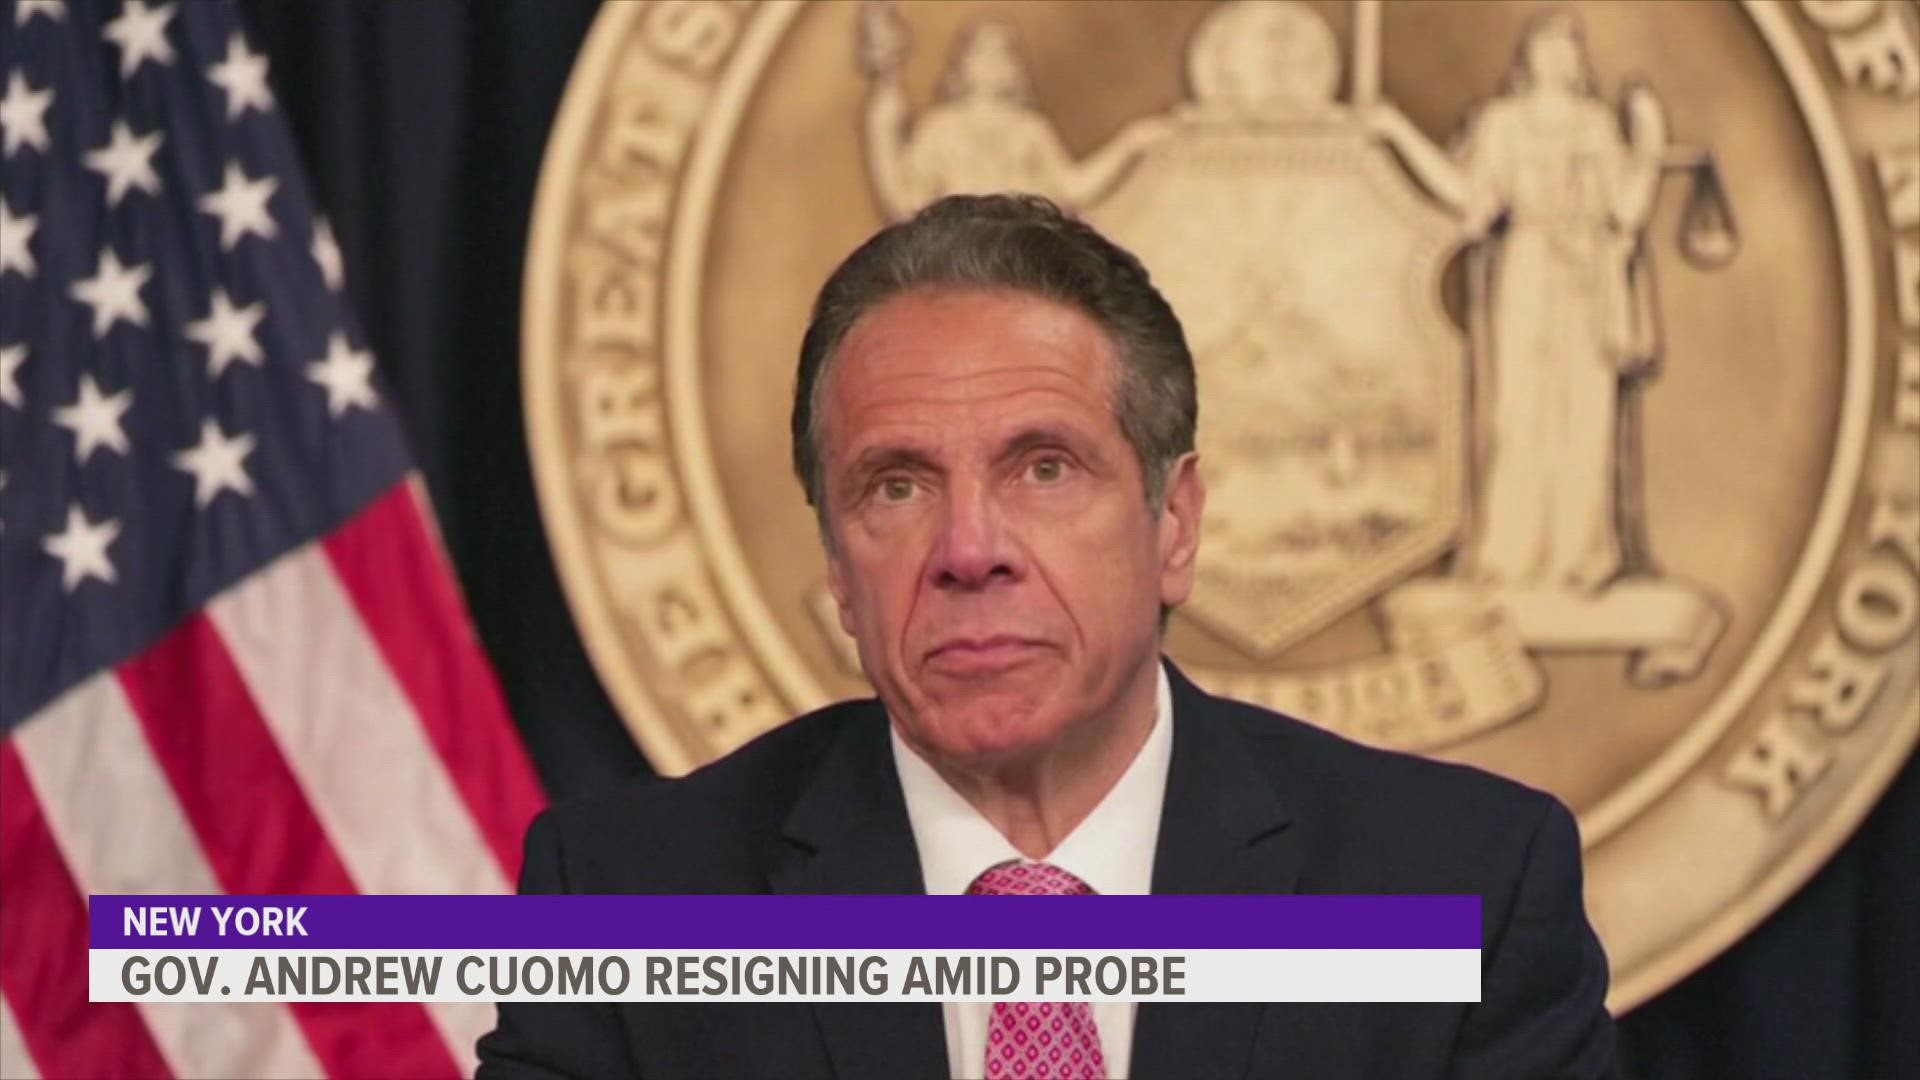 Investigators said Cuomo subjected women to unwanted kisses; groped their breasts or buttocks or otherwise touched them inappropriately.